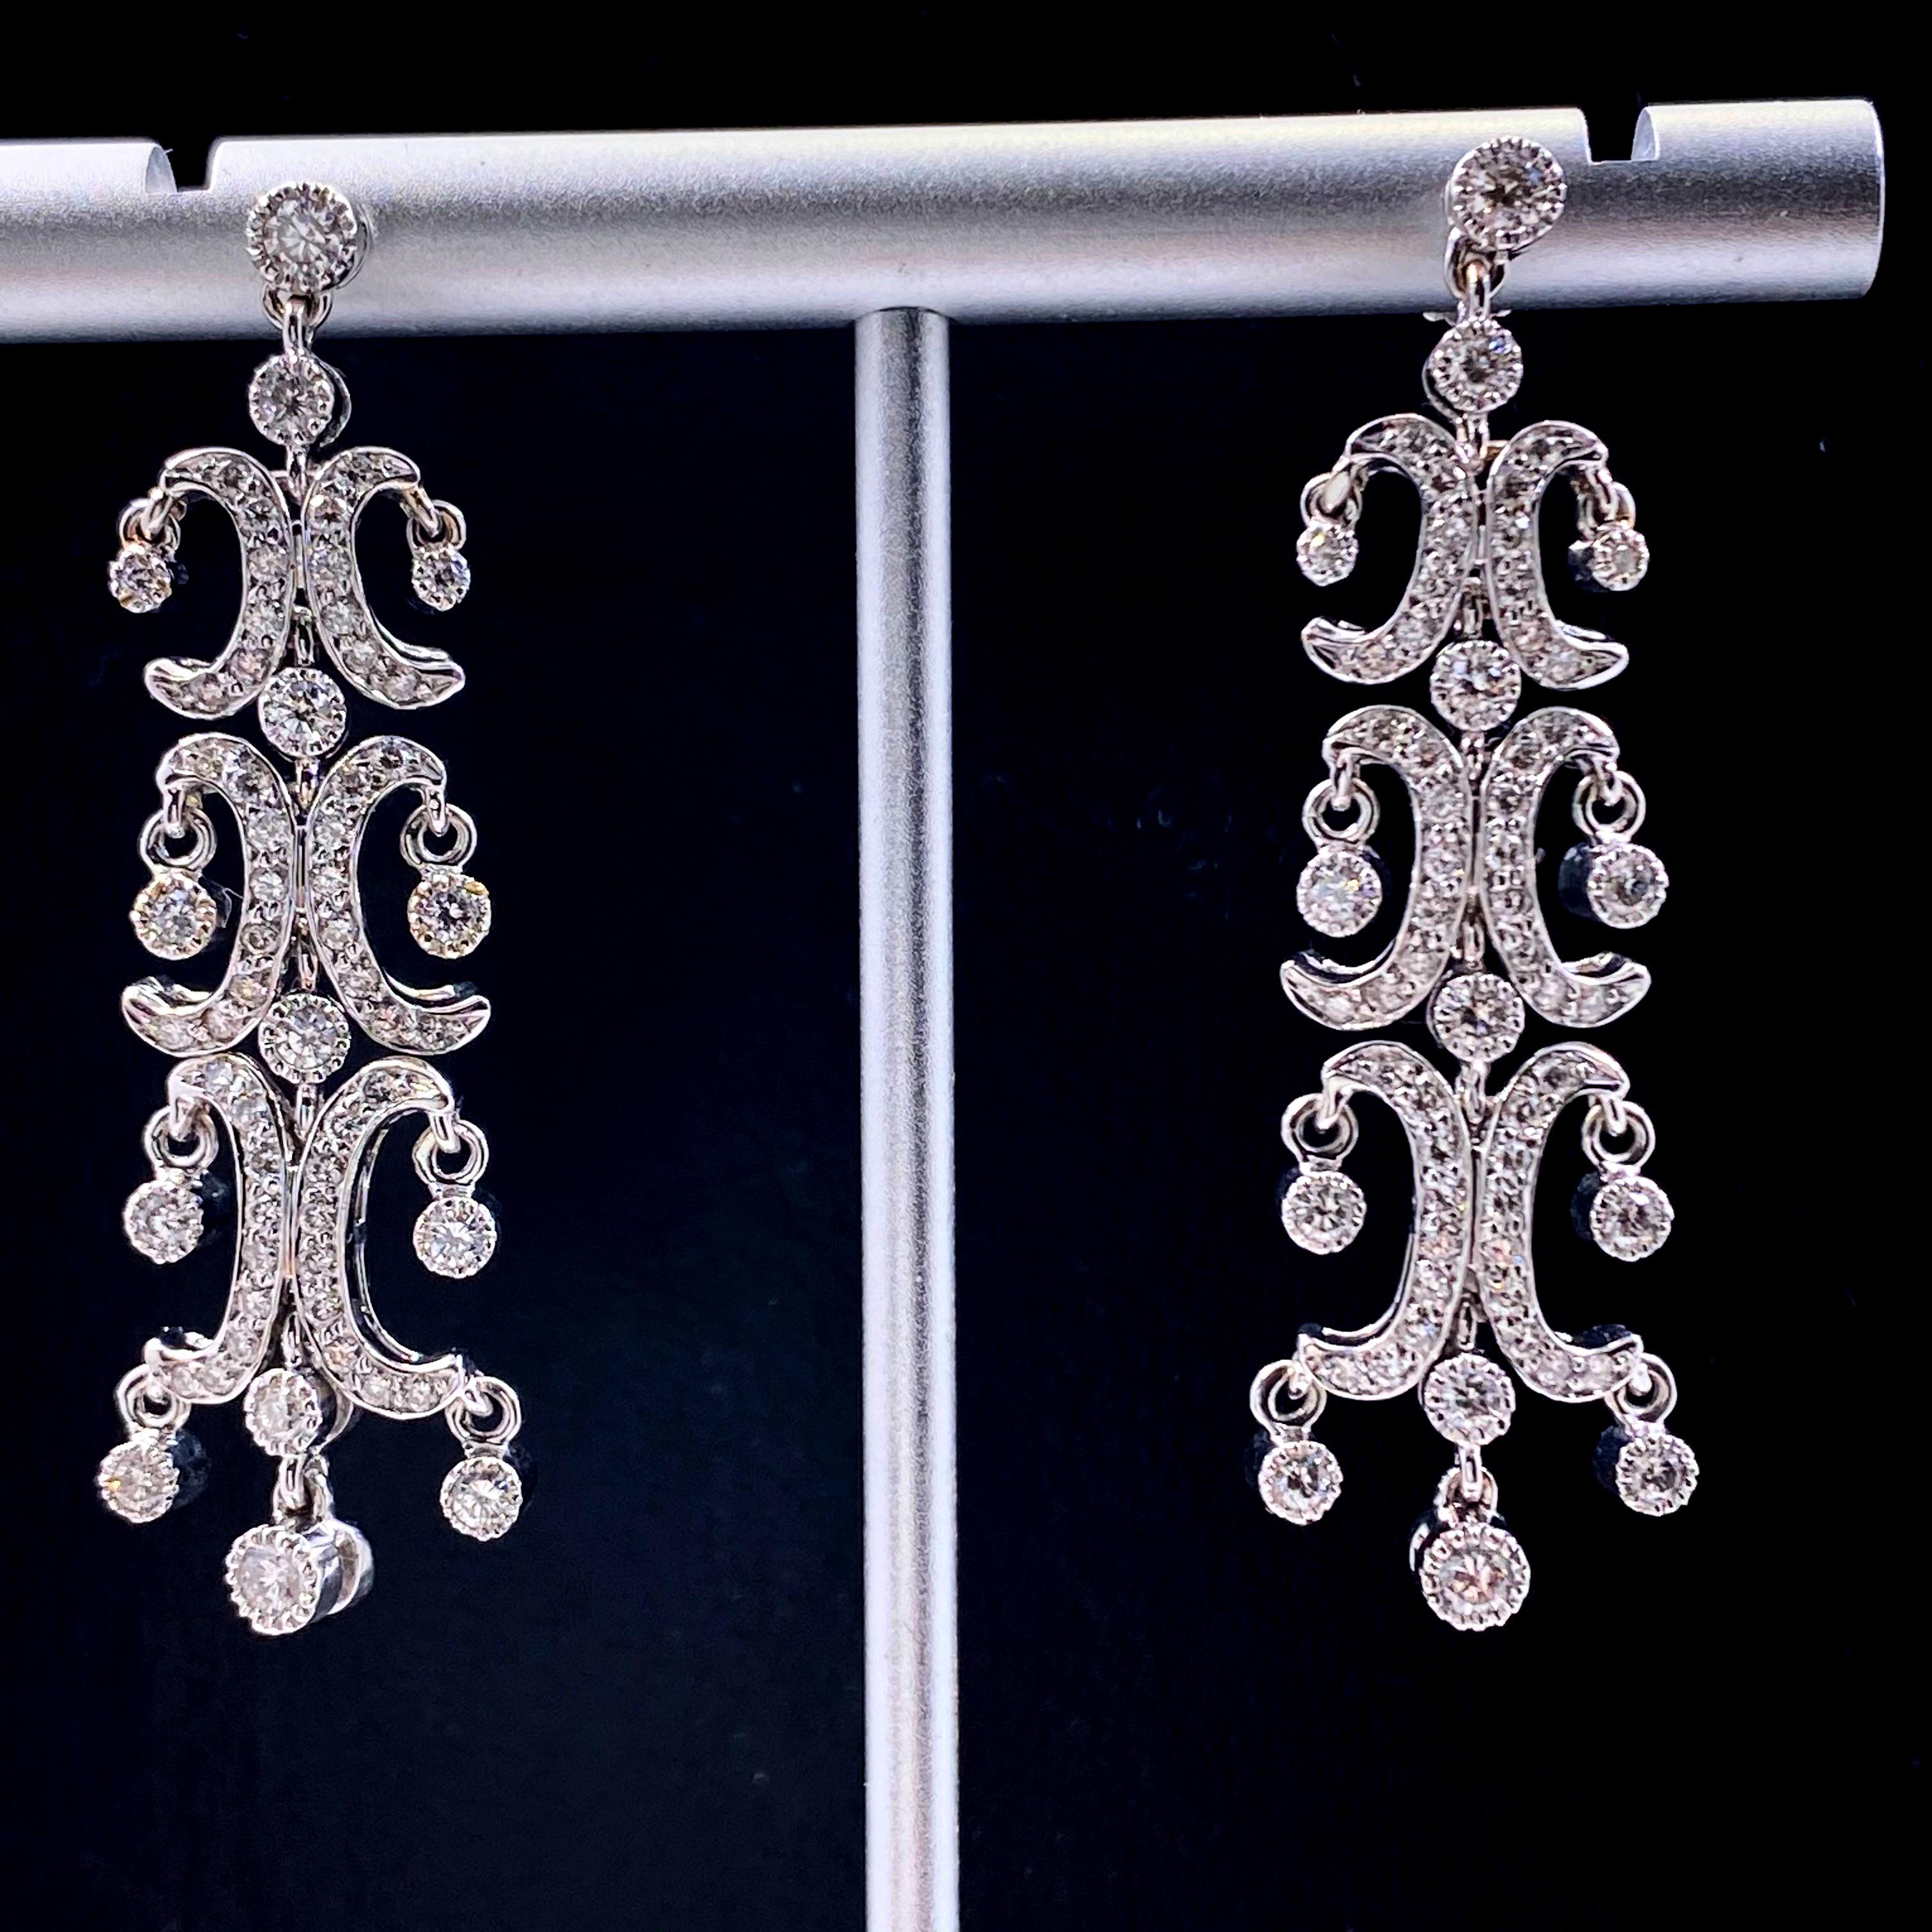 Diamond Chandelier Earrings 1.70 Carat G VS 18 Karat White Gold In Excellent Condition For Sale In San Diego, CA